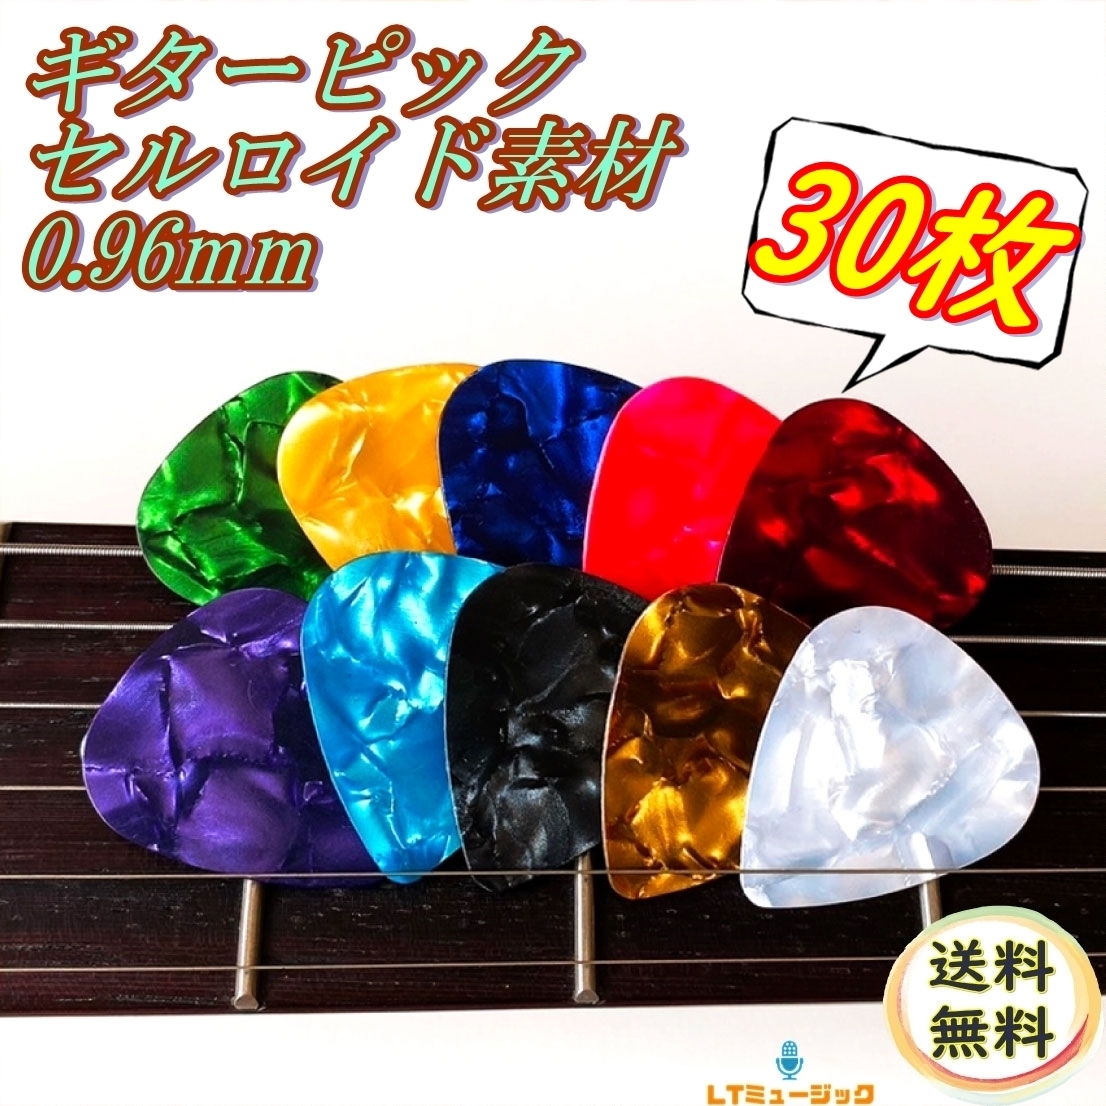 0.96mm Teardrop type guitar pick 30 sheets cell Lloyd soft electro akogi acoustic electric acoustic guitar color Random 